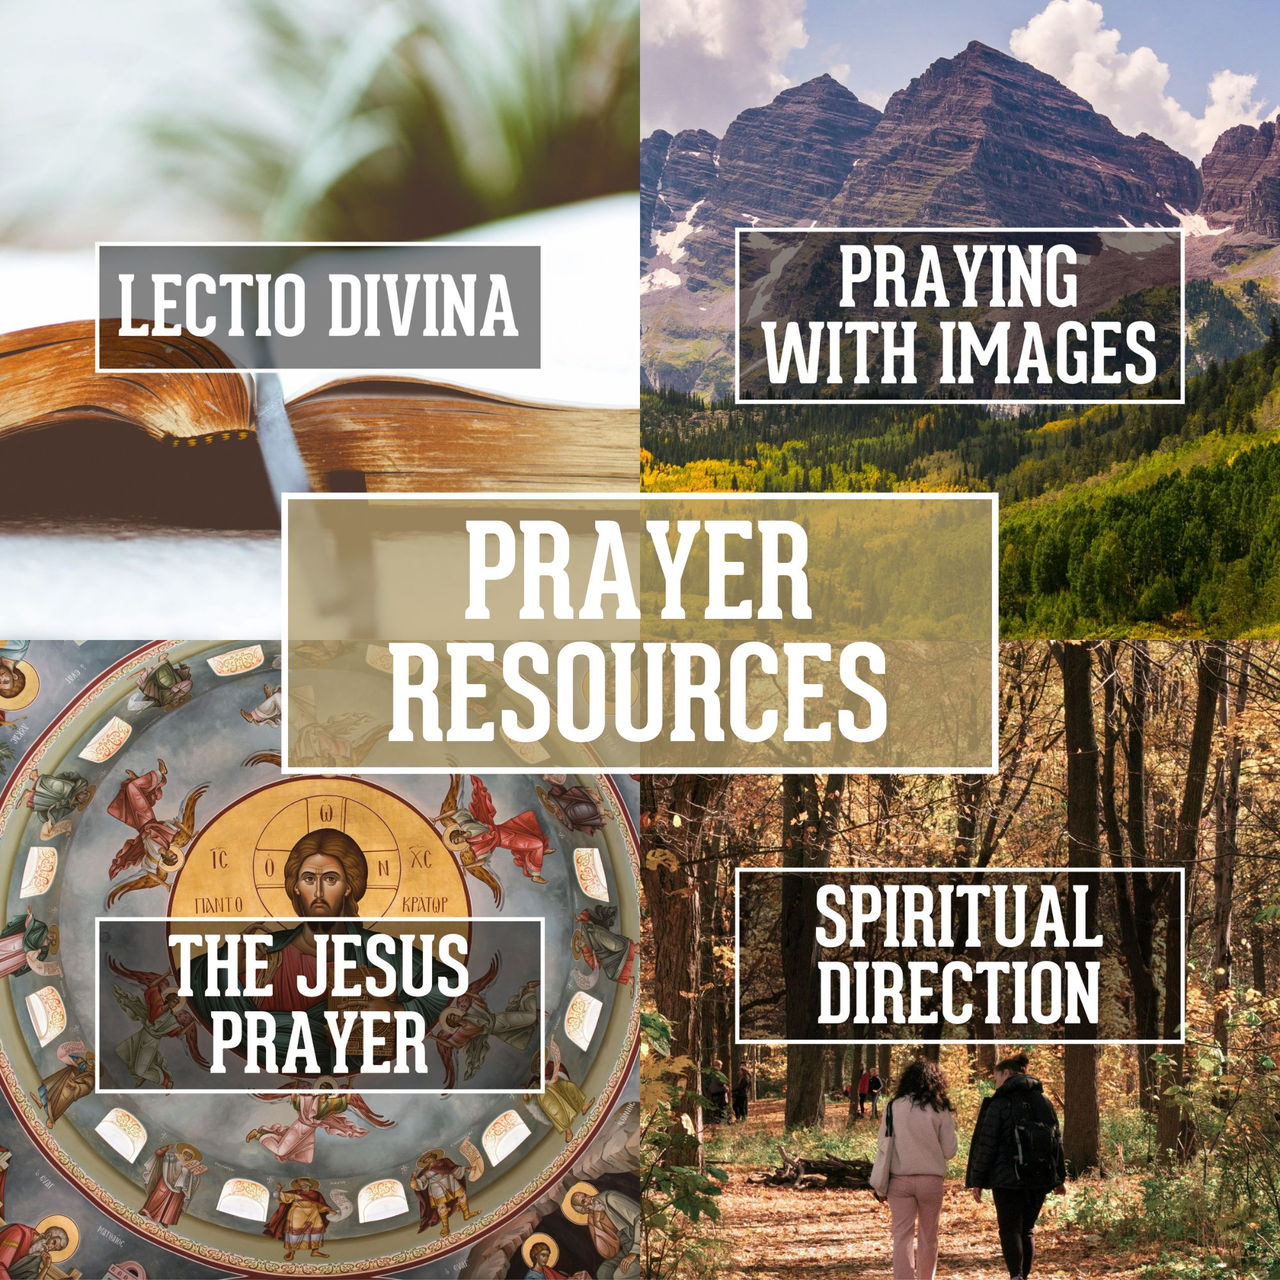 Prayer Resources Article Covers - 9